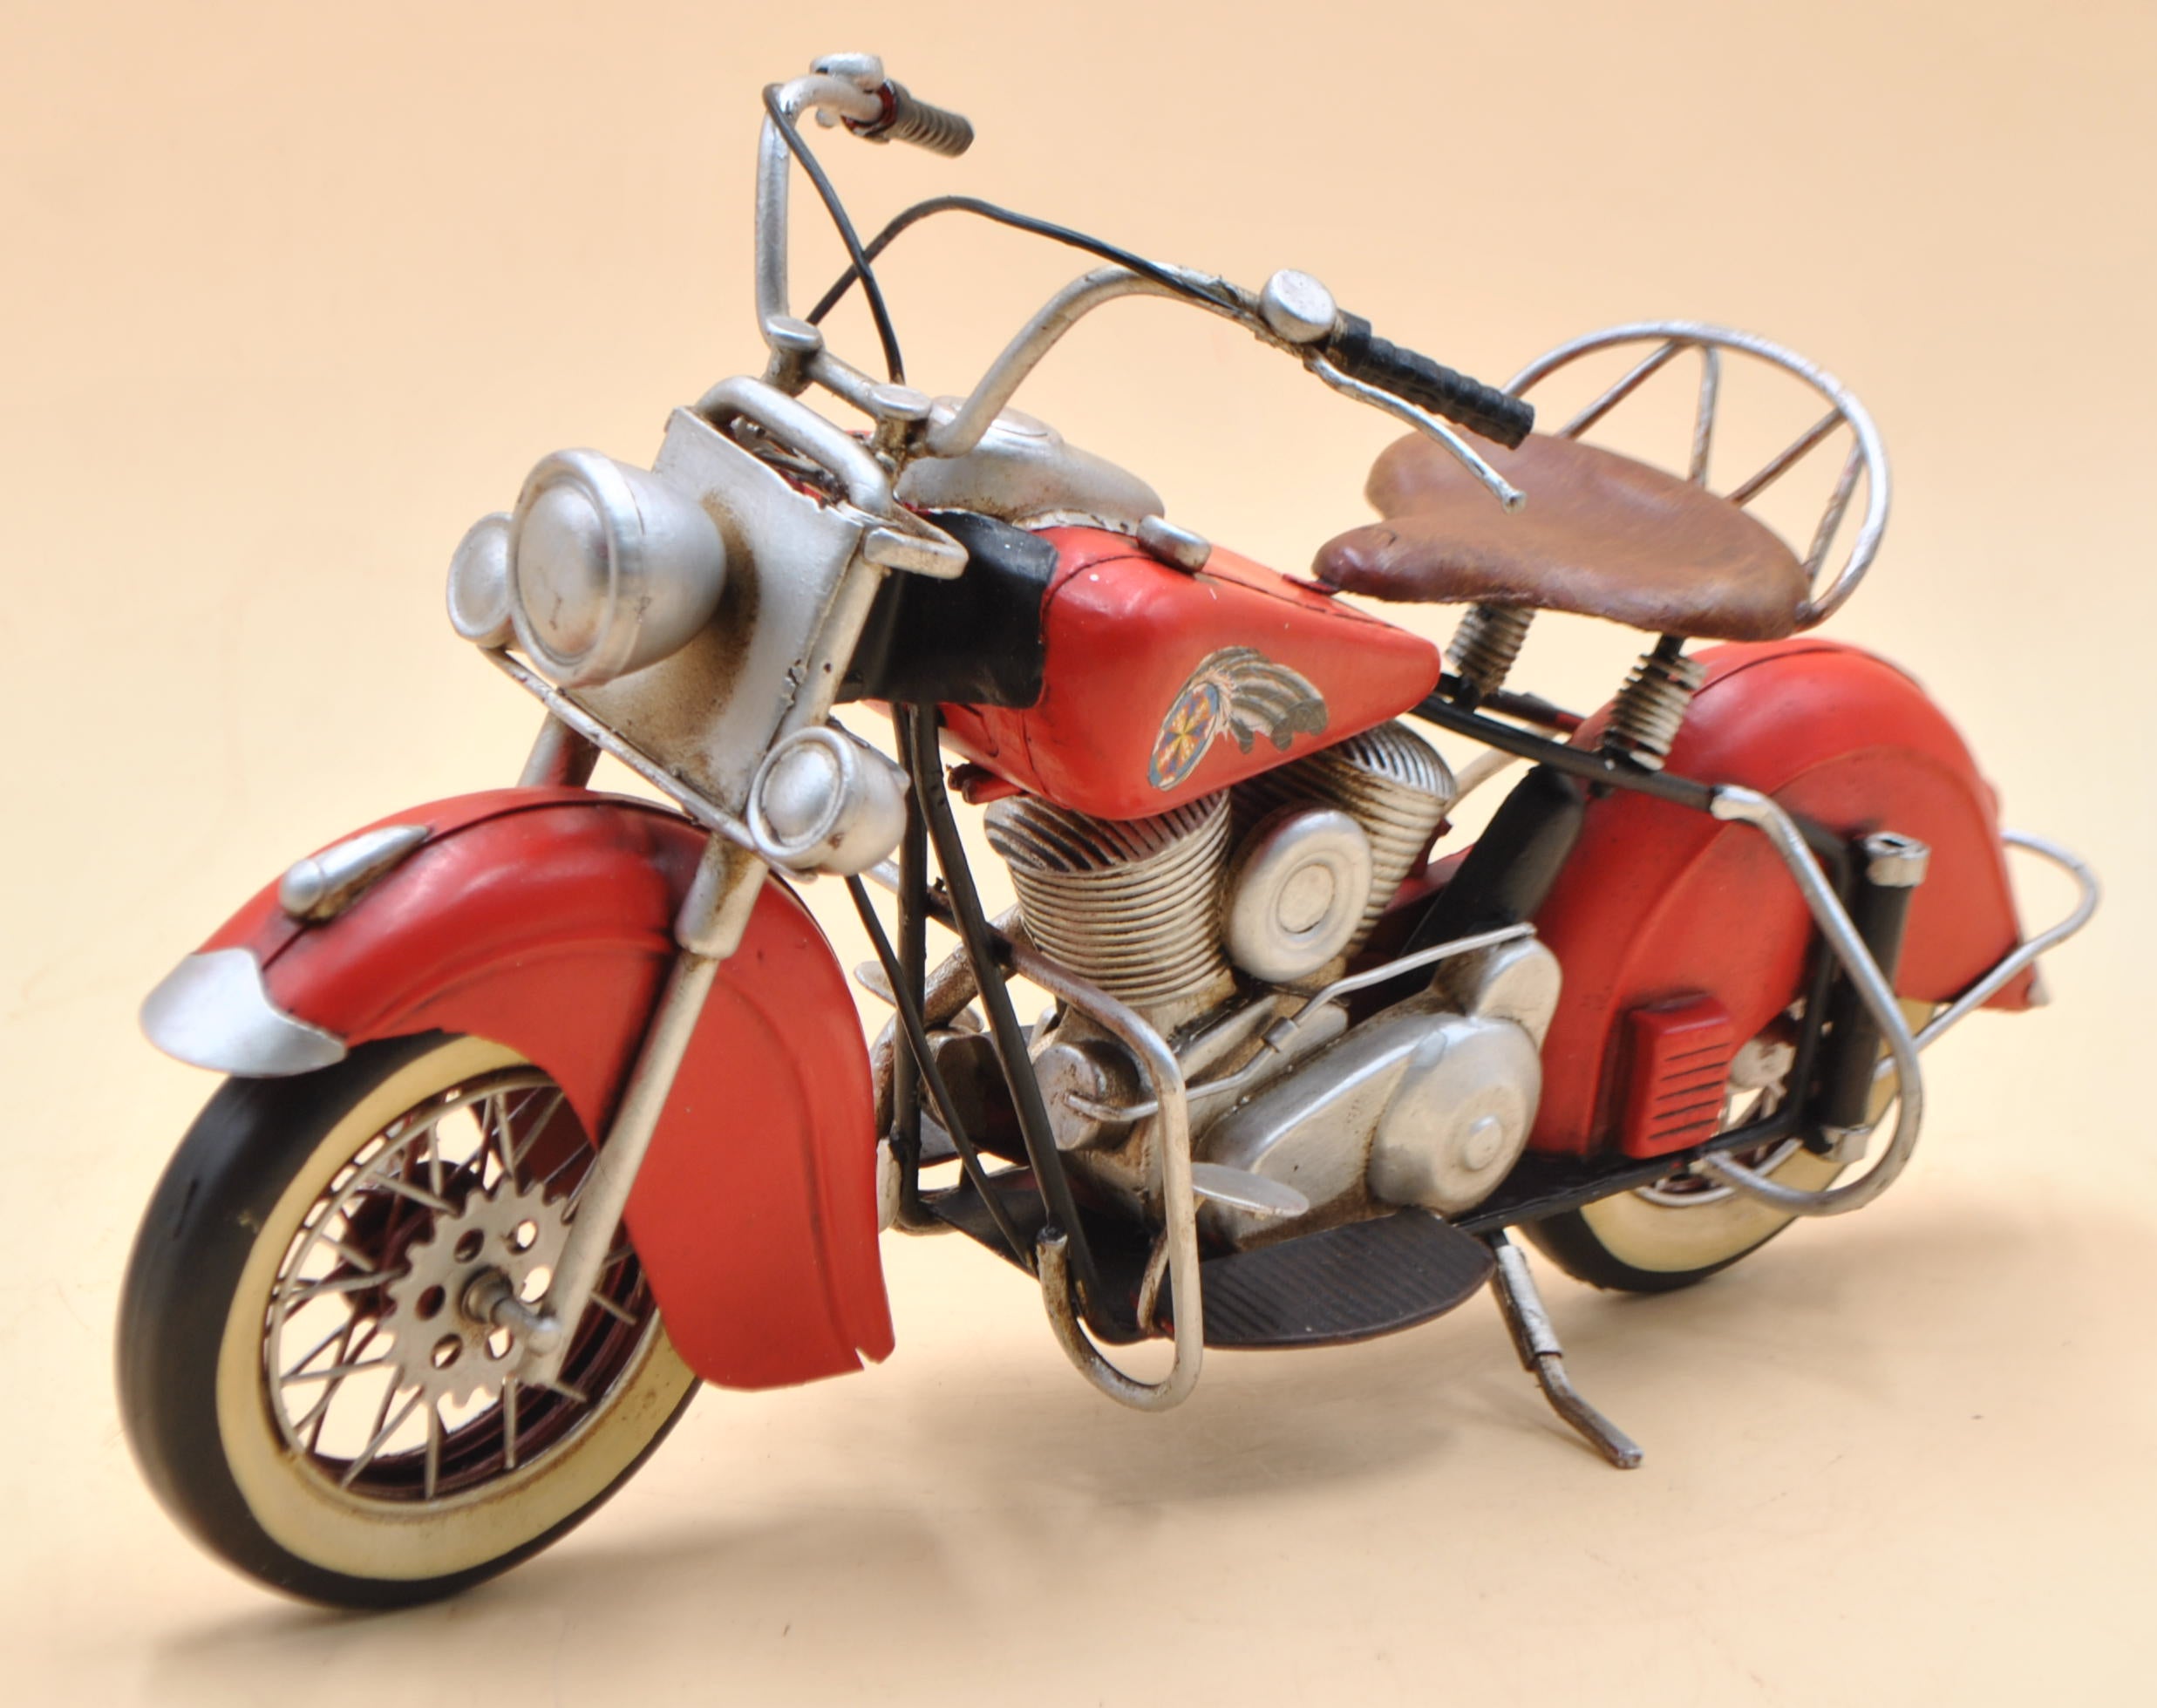 1947 Indian Motorcycle 1:8 Scale Home/Office Perfect Decor SALE